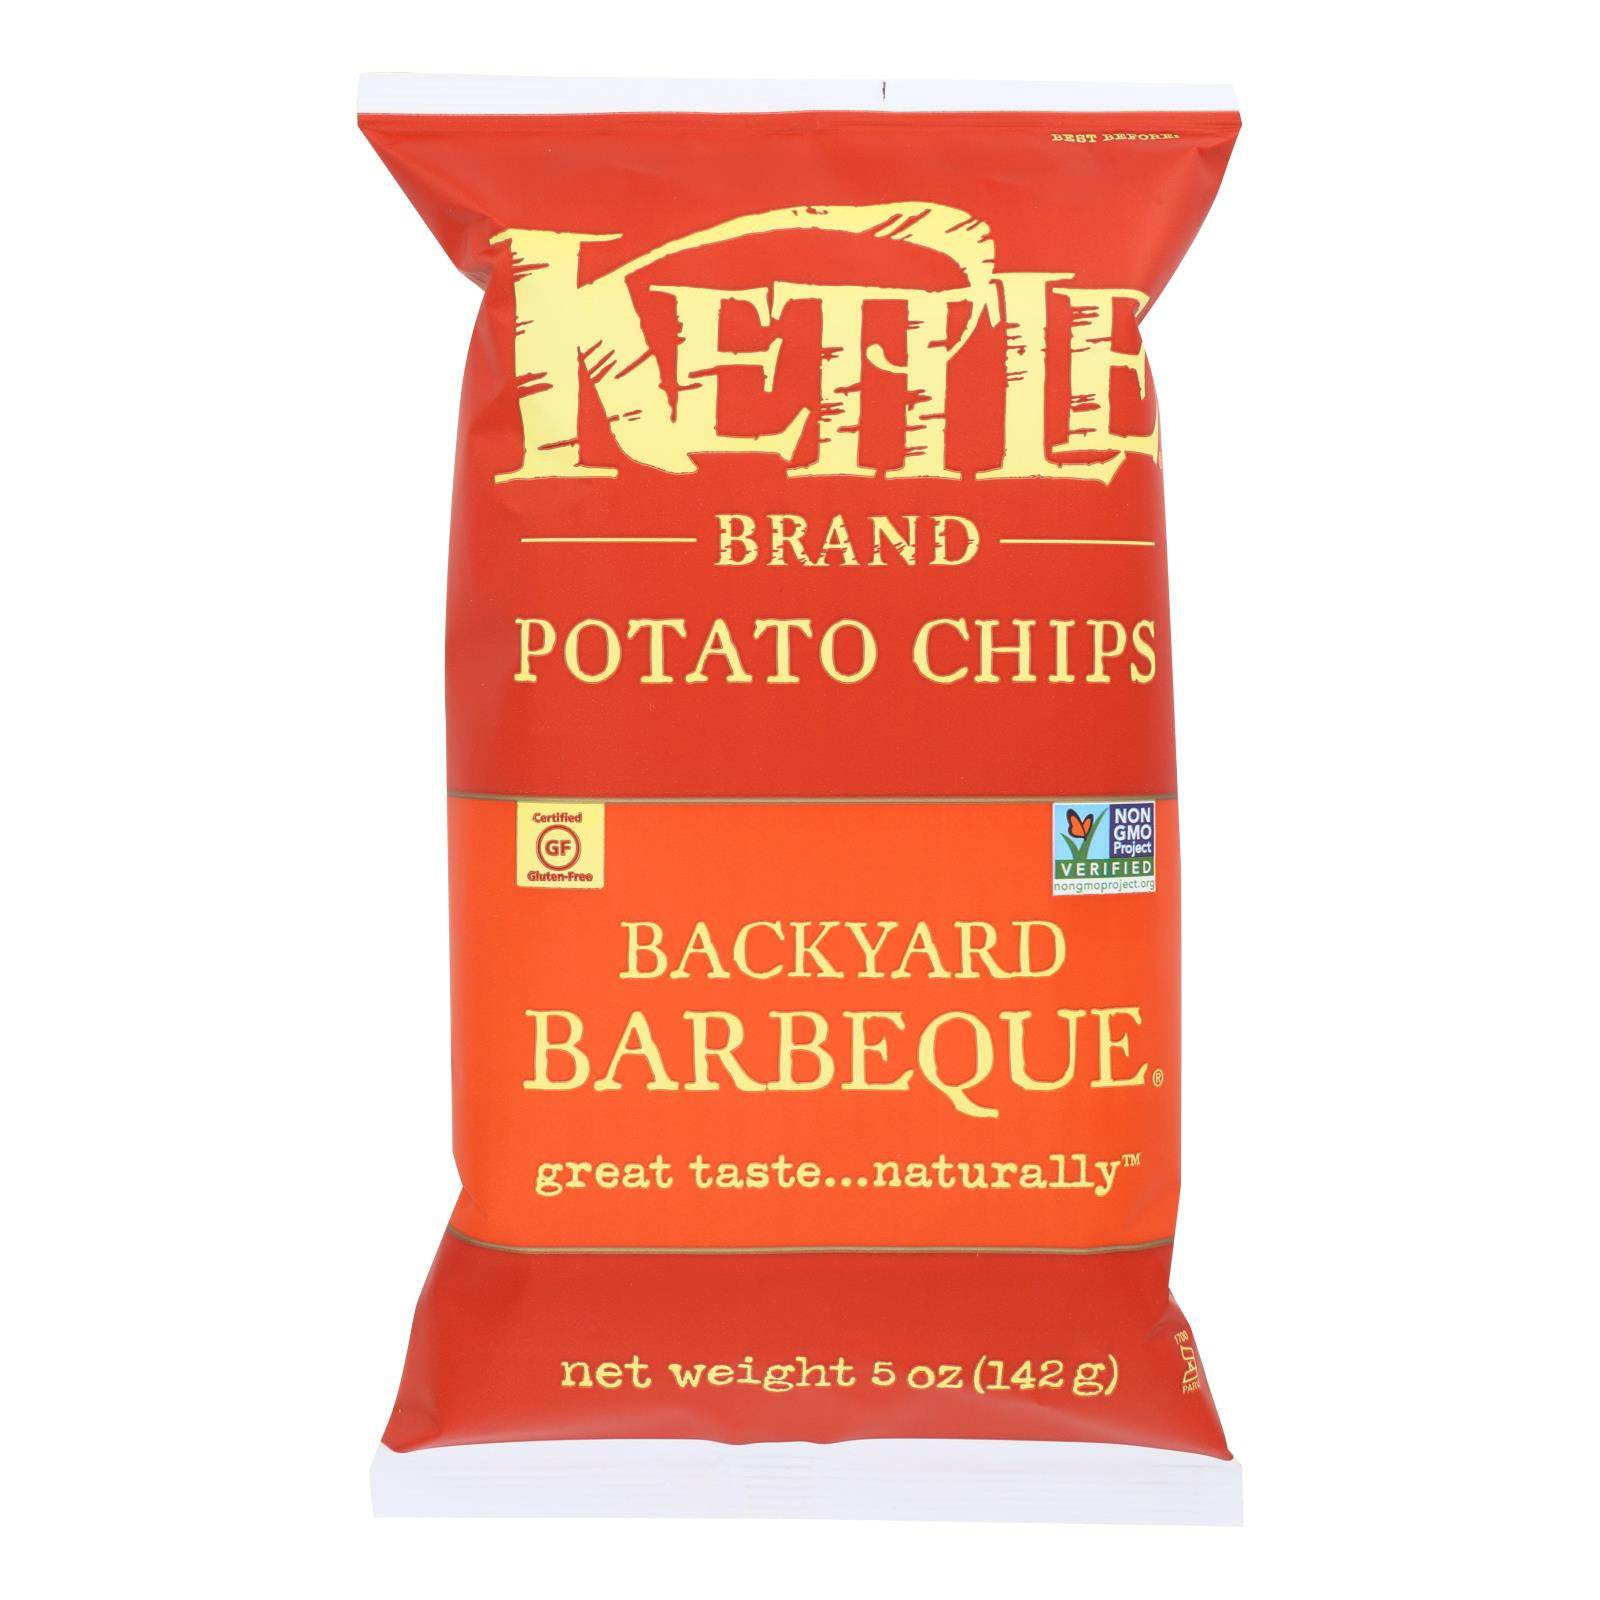 Kettle Brand Potato Chips - Backyard Barbeque - Case Of 15 - 5 Oz. | OnlyNaturals.us